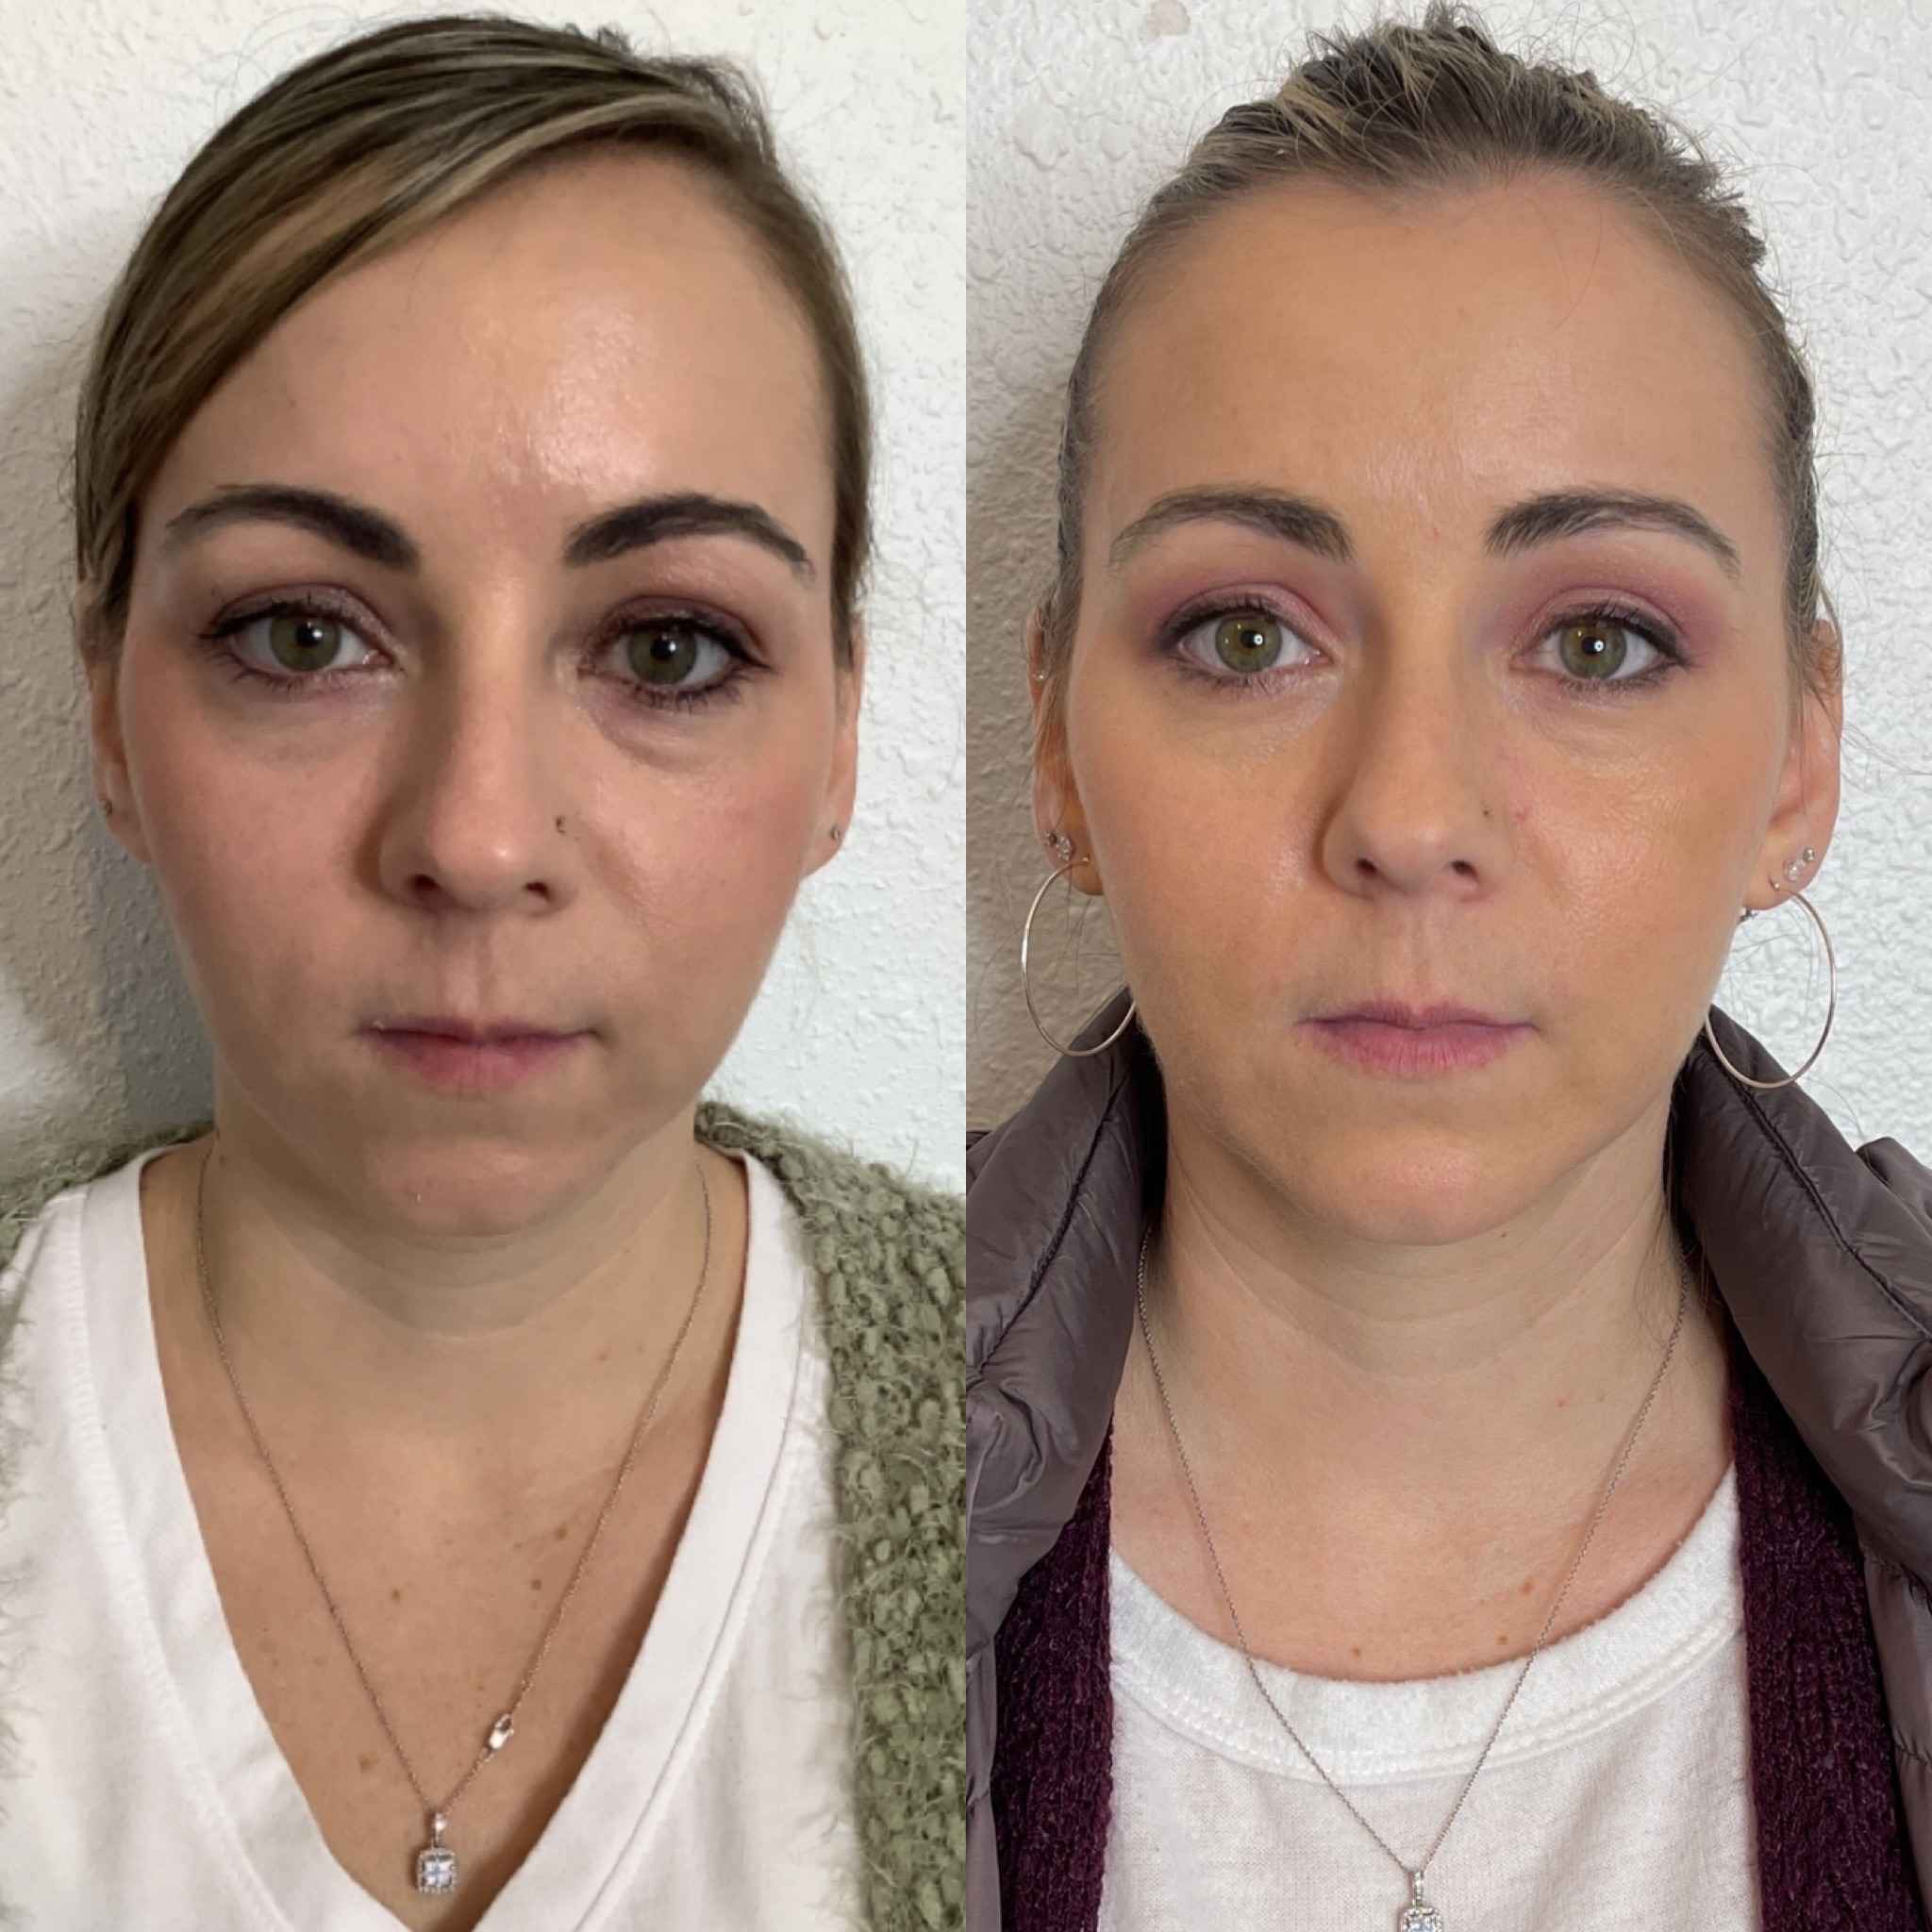 Before and After Changes by PDO Threads Treatment | Onyx Medical Aesthetics | Homann Dr. S.E. suite B Lacey, WA